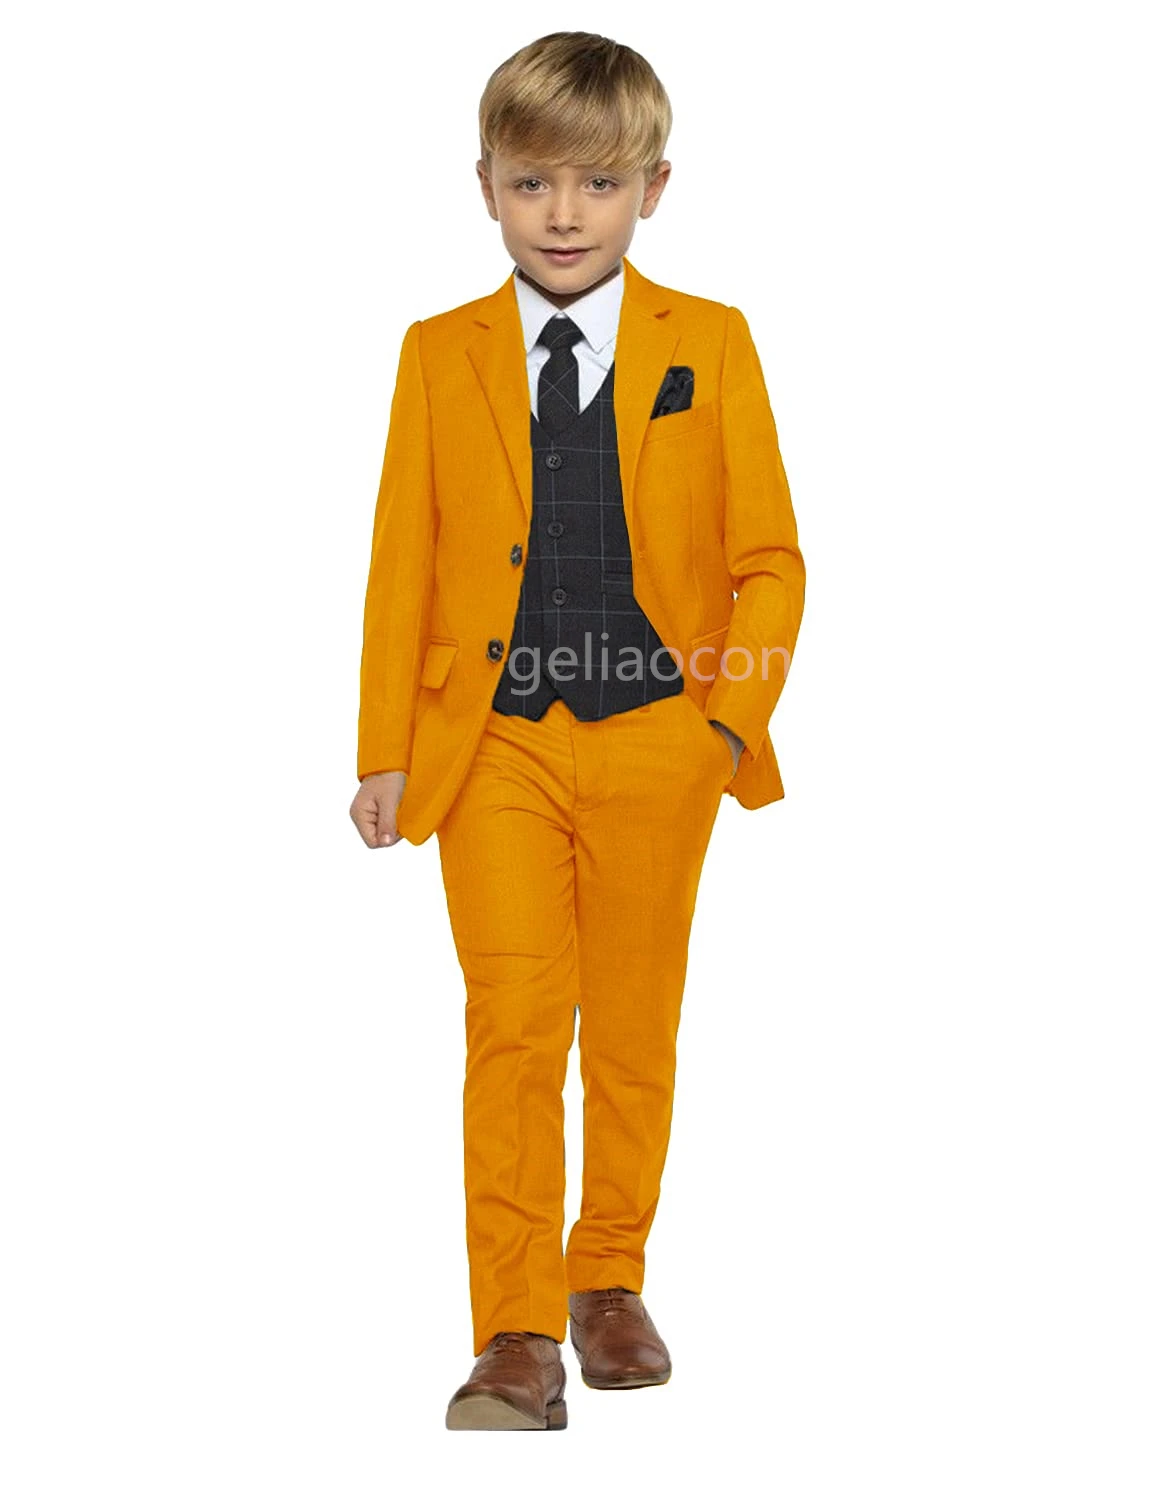 2022 New Tuxedo Formal Baby Boy Wedding Suits Solid Kids School Uniform Elegant Children Ceremony Costumes Toddler Party Clothes